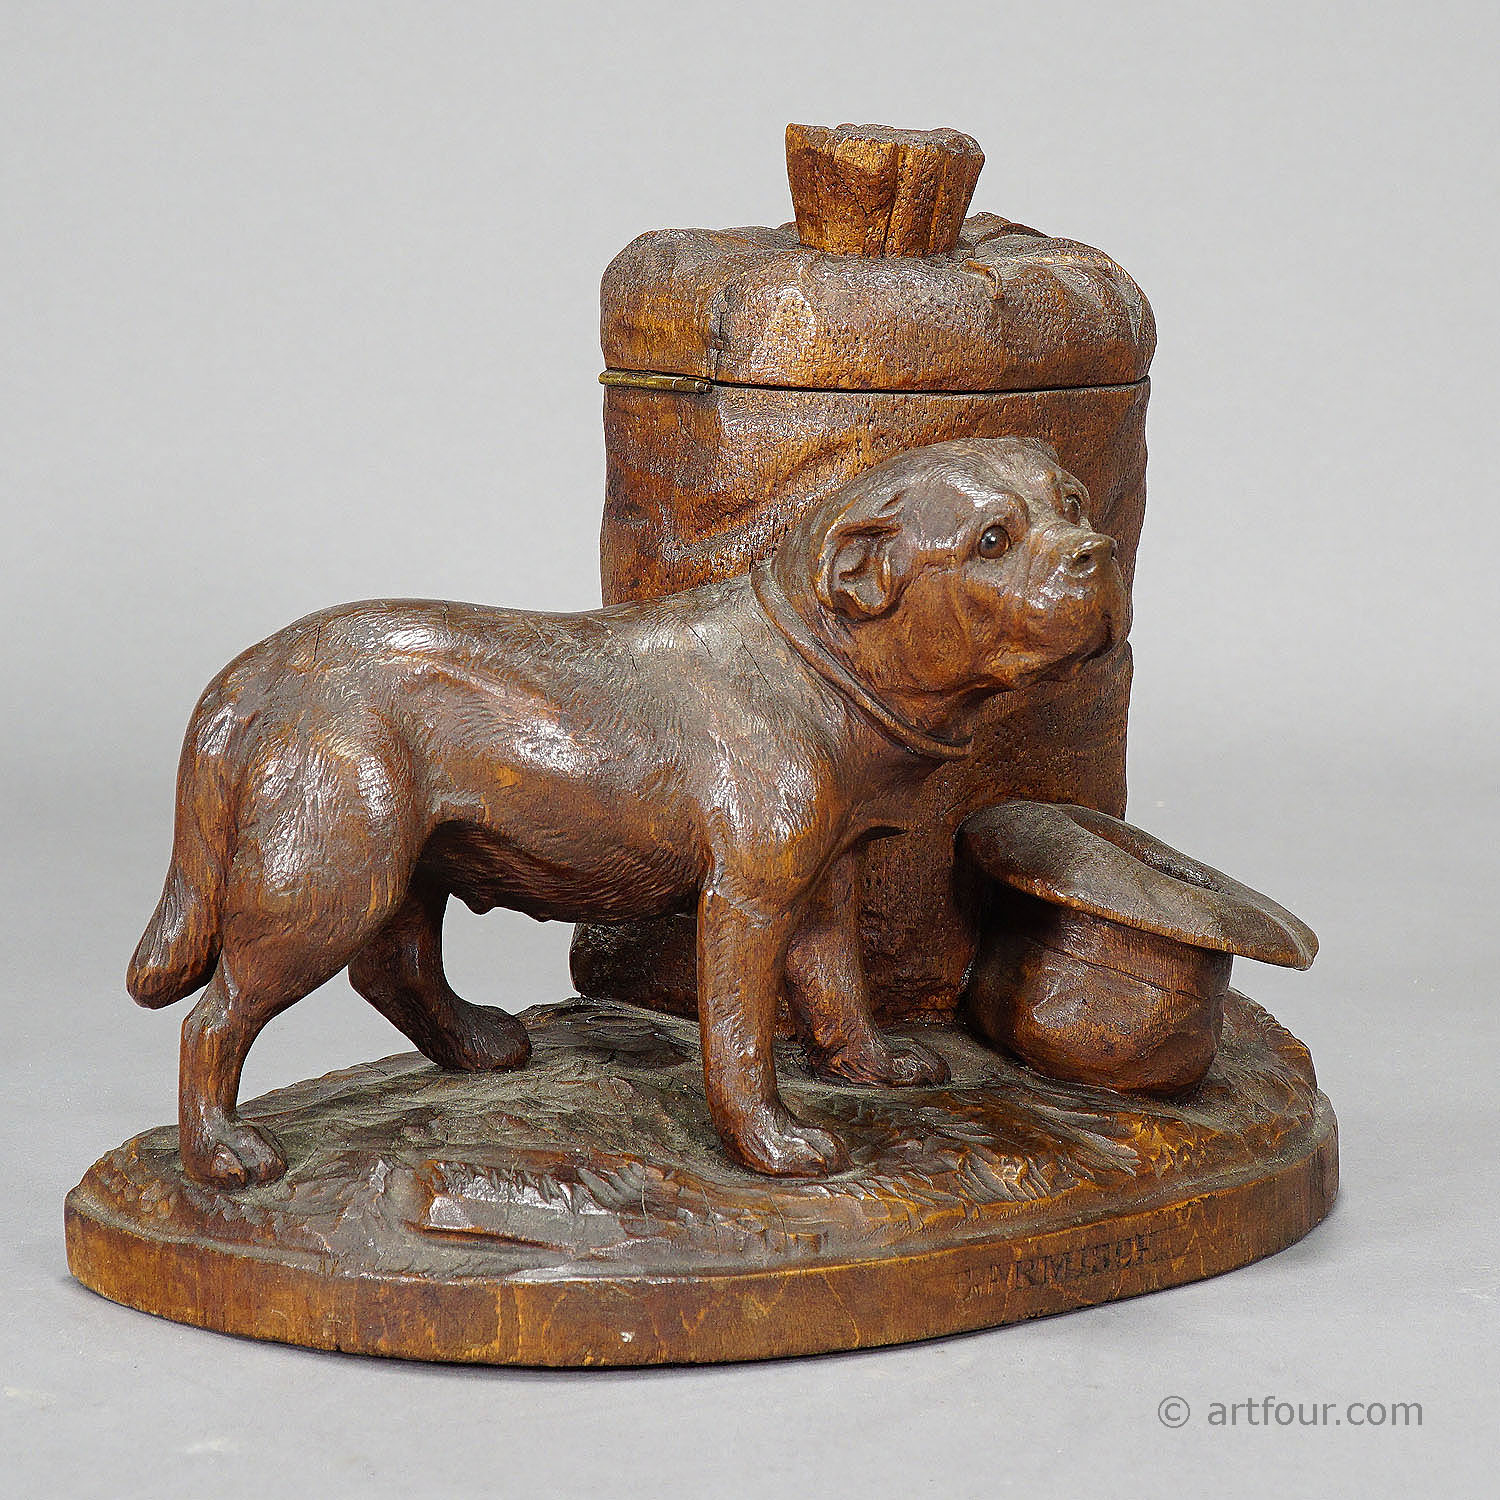 Wooden Carved Tobacco Box with Boxer, Swizerland ca. 1900